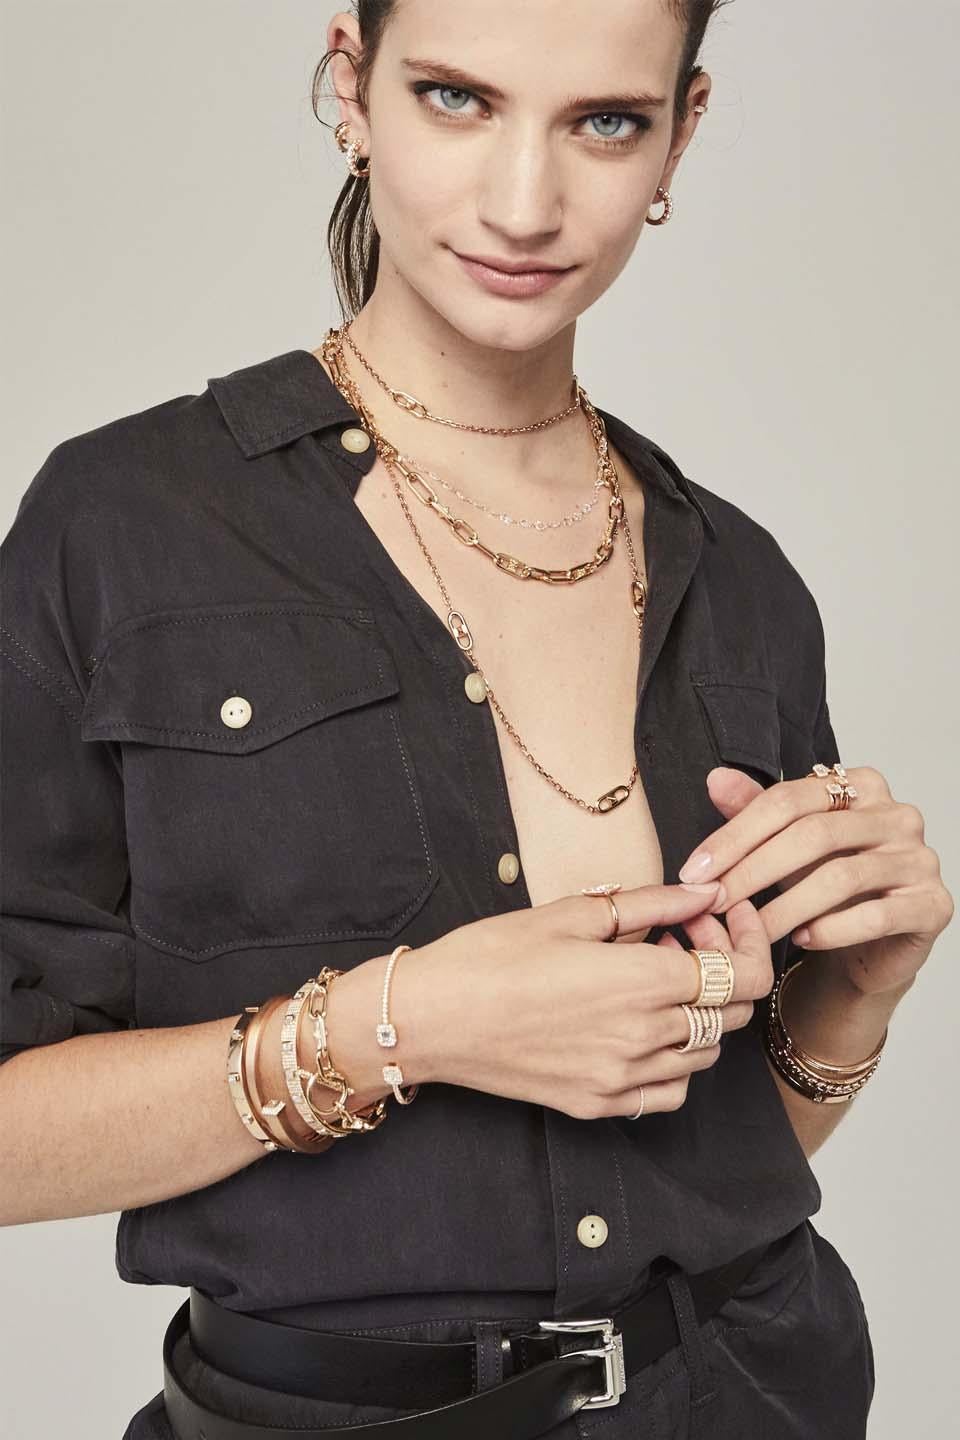 Kensington Diamonds Necklace /  Rose Gold. Necklace with white brilliant cut diamonds (ct. 2,39) set in rose gold 18Kt.

Kensington, a new British redesign collection inspired by Kensington Gardens. Bracelets, earrings, necklaces and rings, gold and